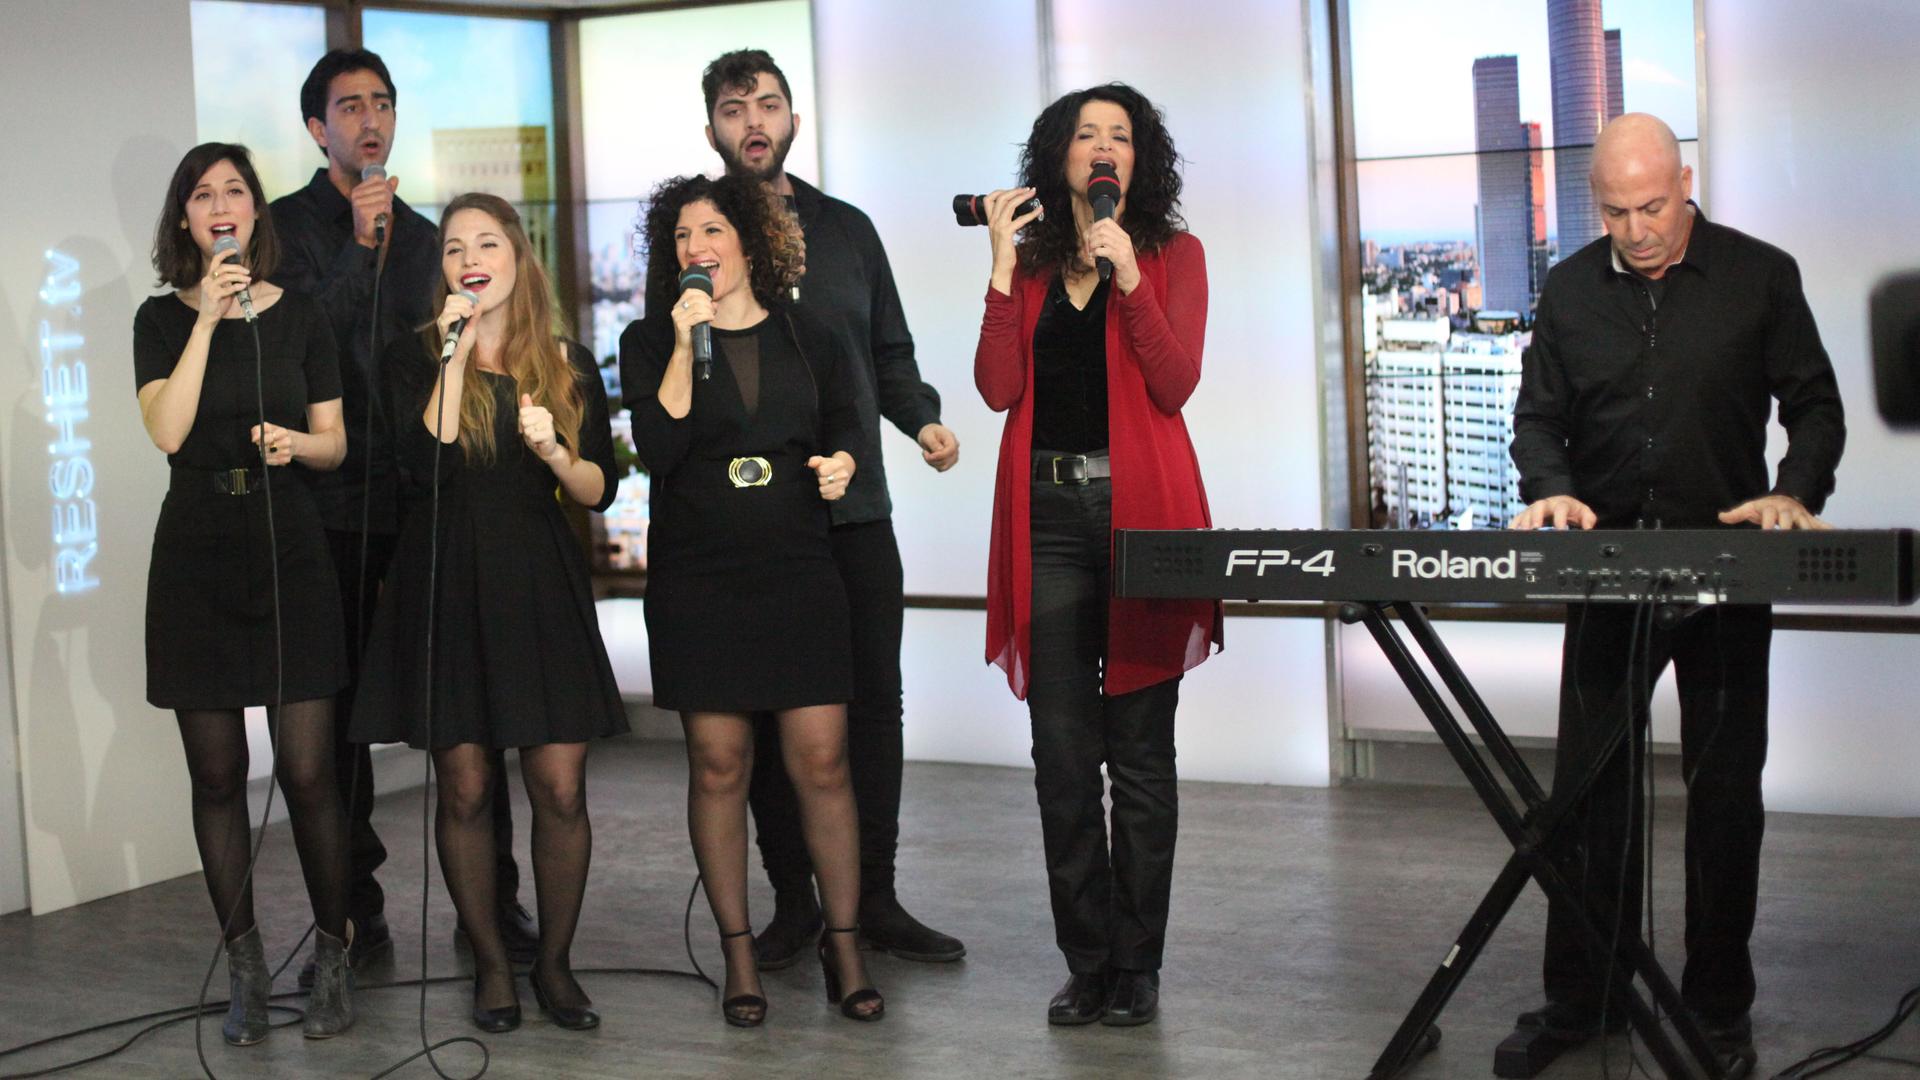 Ofer Portugaly on piano, and his wife Iris (standing next to him), started an Israeli gospel choir in 1999 after a trip to Nigeria. Here, they appear with part of their 15-member ensemble on Israeli TV.